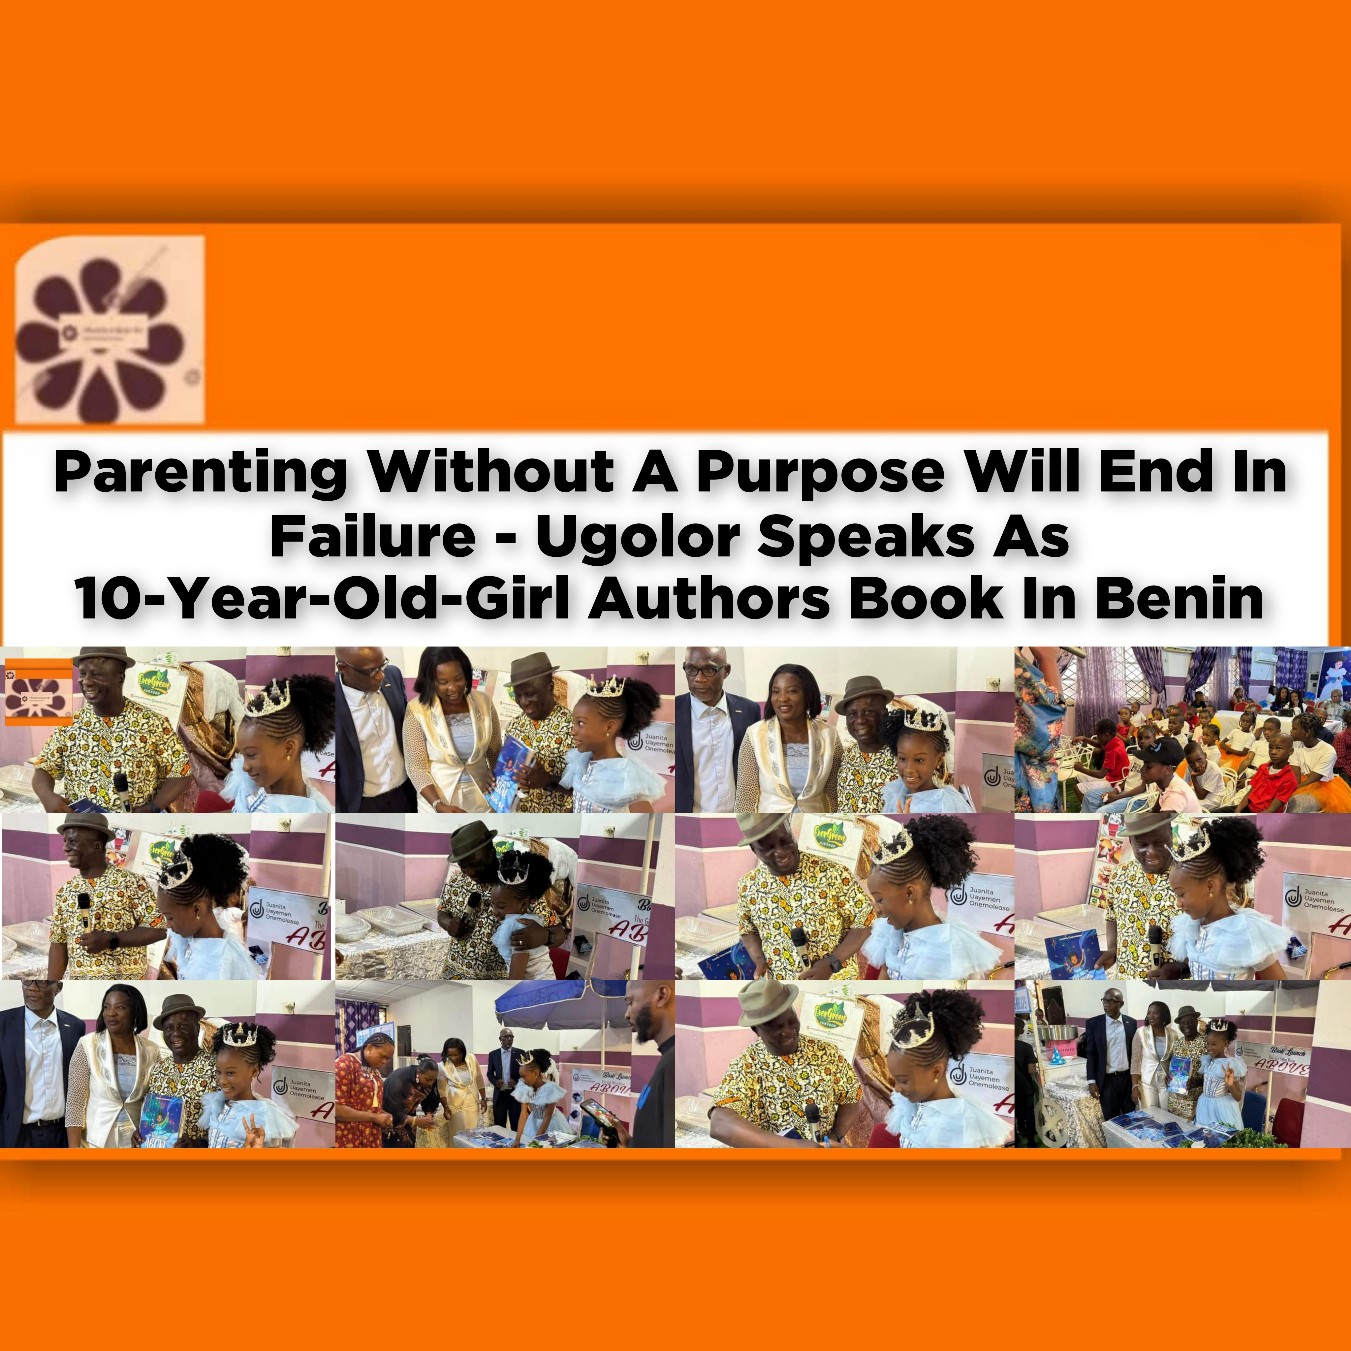 Parenting Without A Purpose Will End In Failure - Ugolor Speaks As 10-Year-Old-Girl Authors Book In Benin ~ OsazuwaAkonedo #PEPC